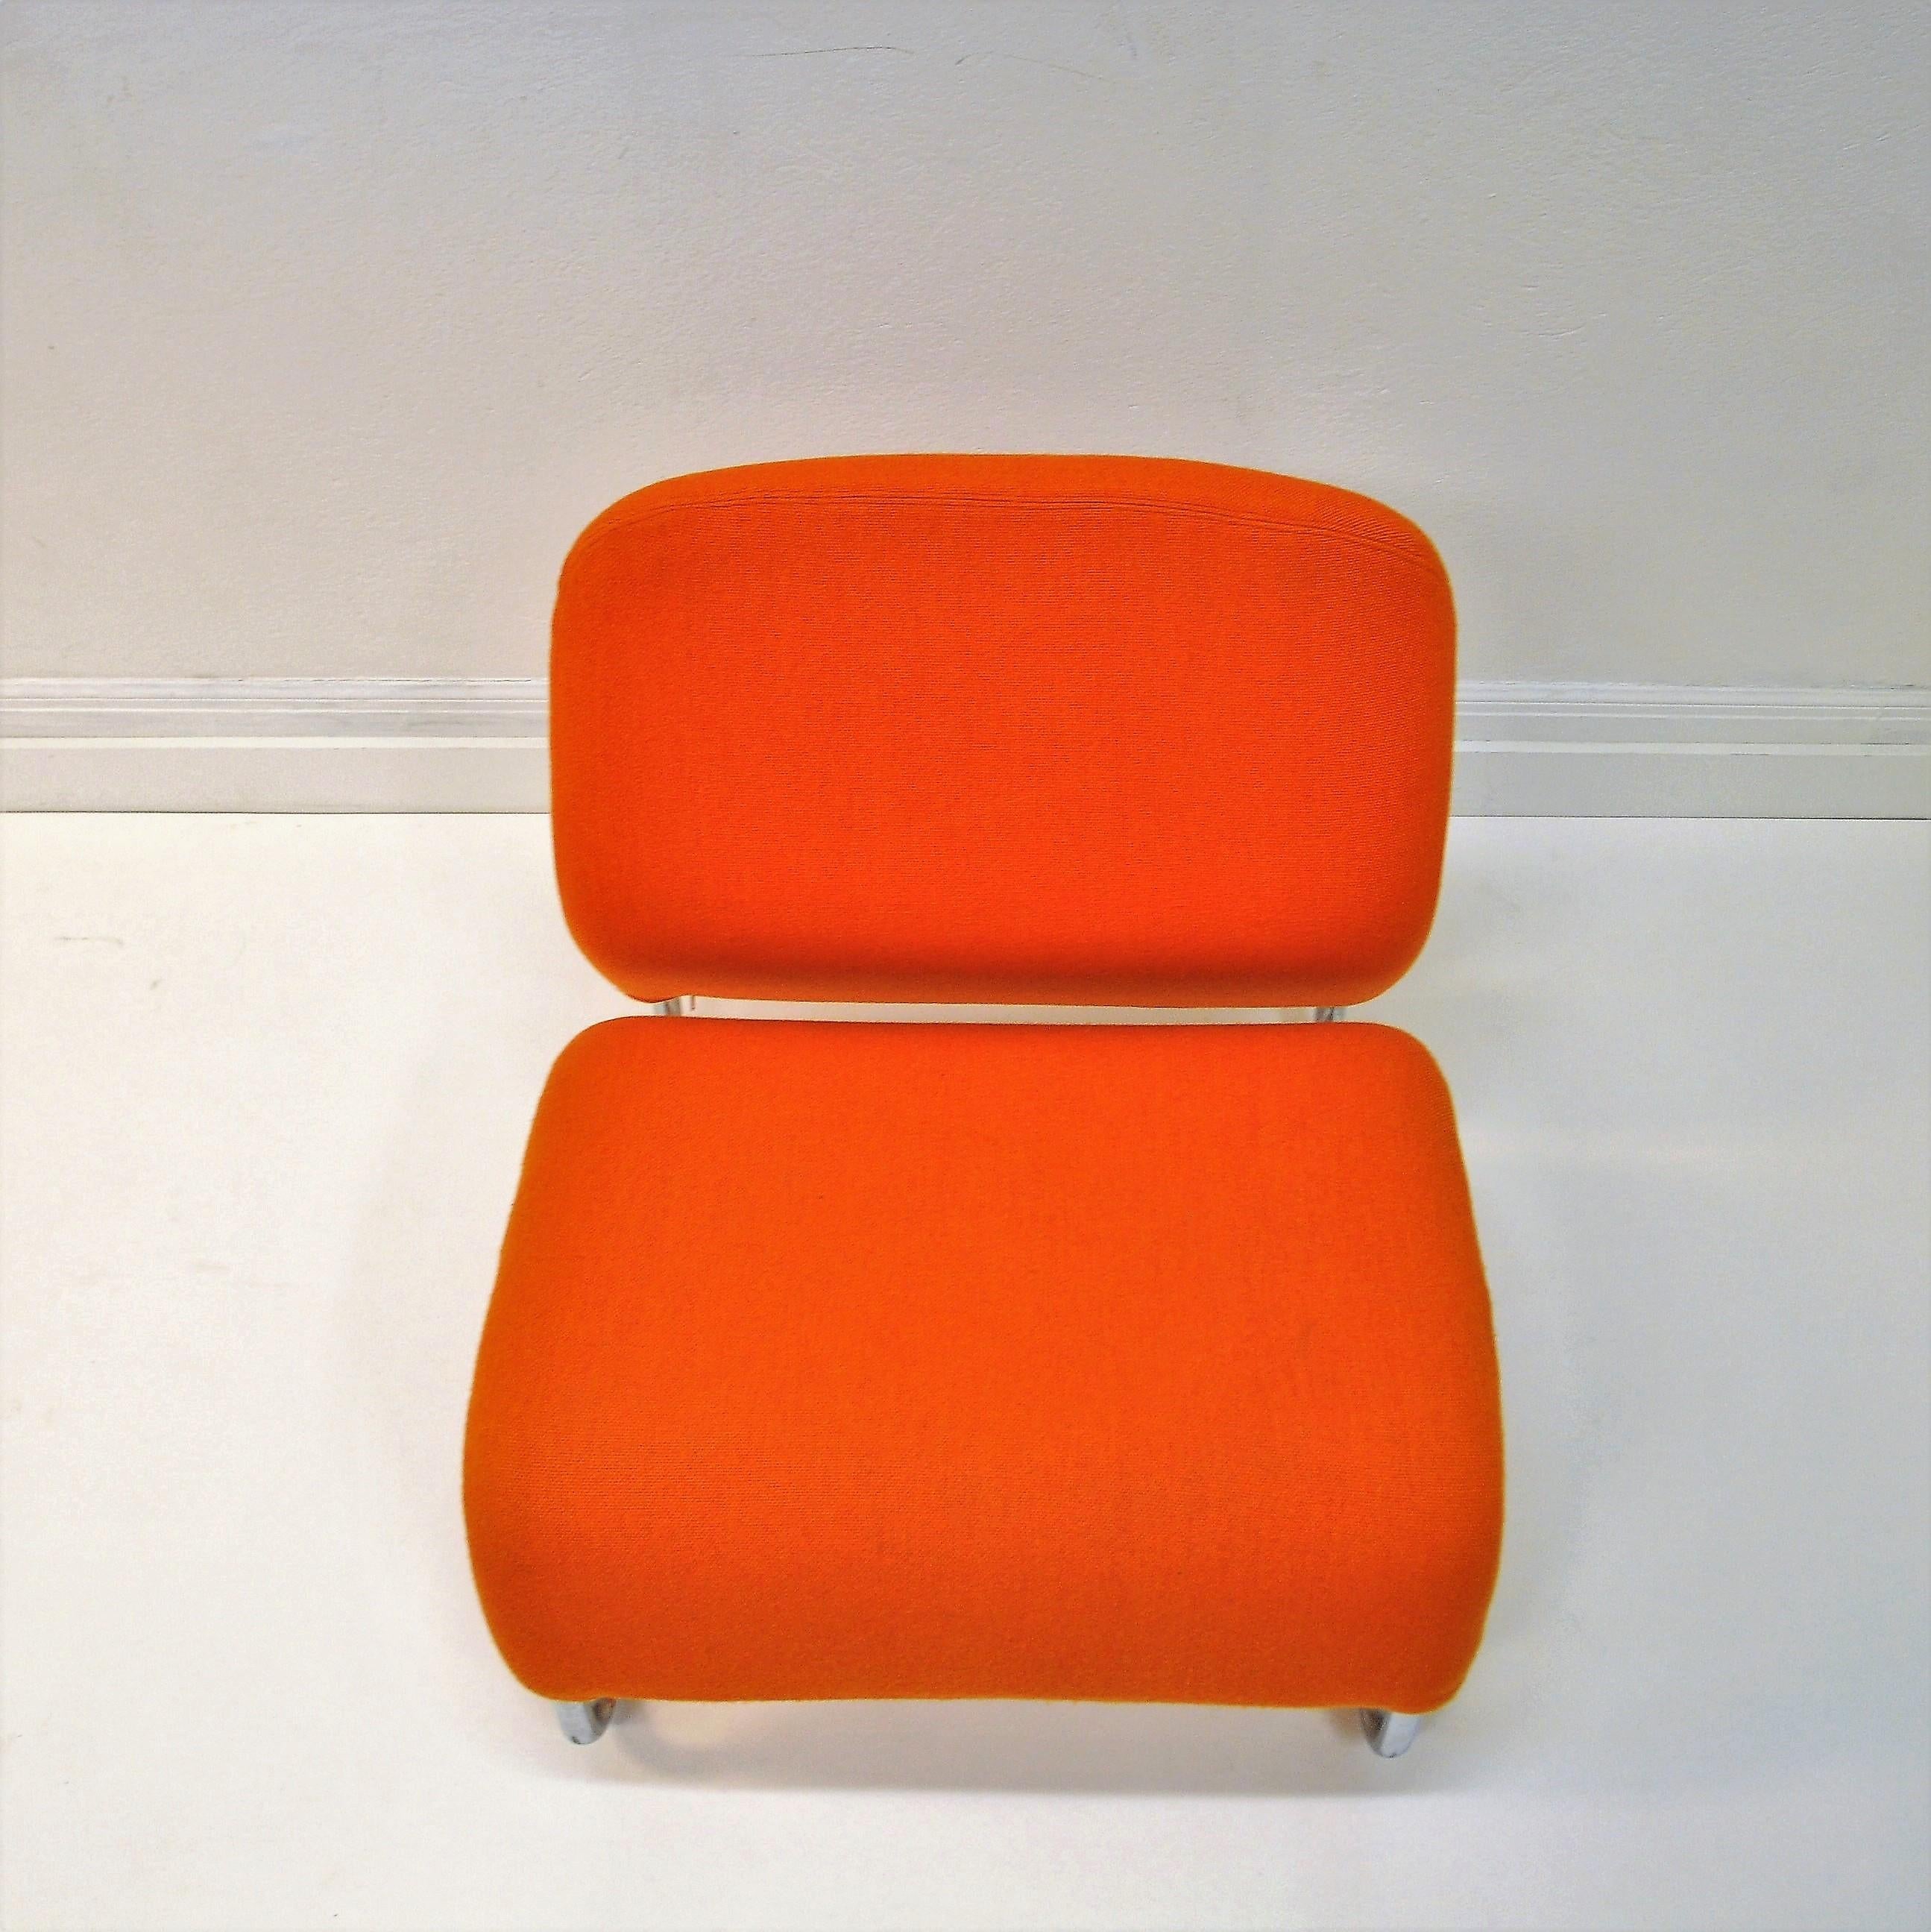 Late 20th Century Orange Lounge Chair Ecco by Møre Design Team 1970, Norway